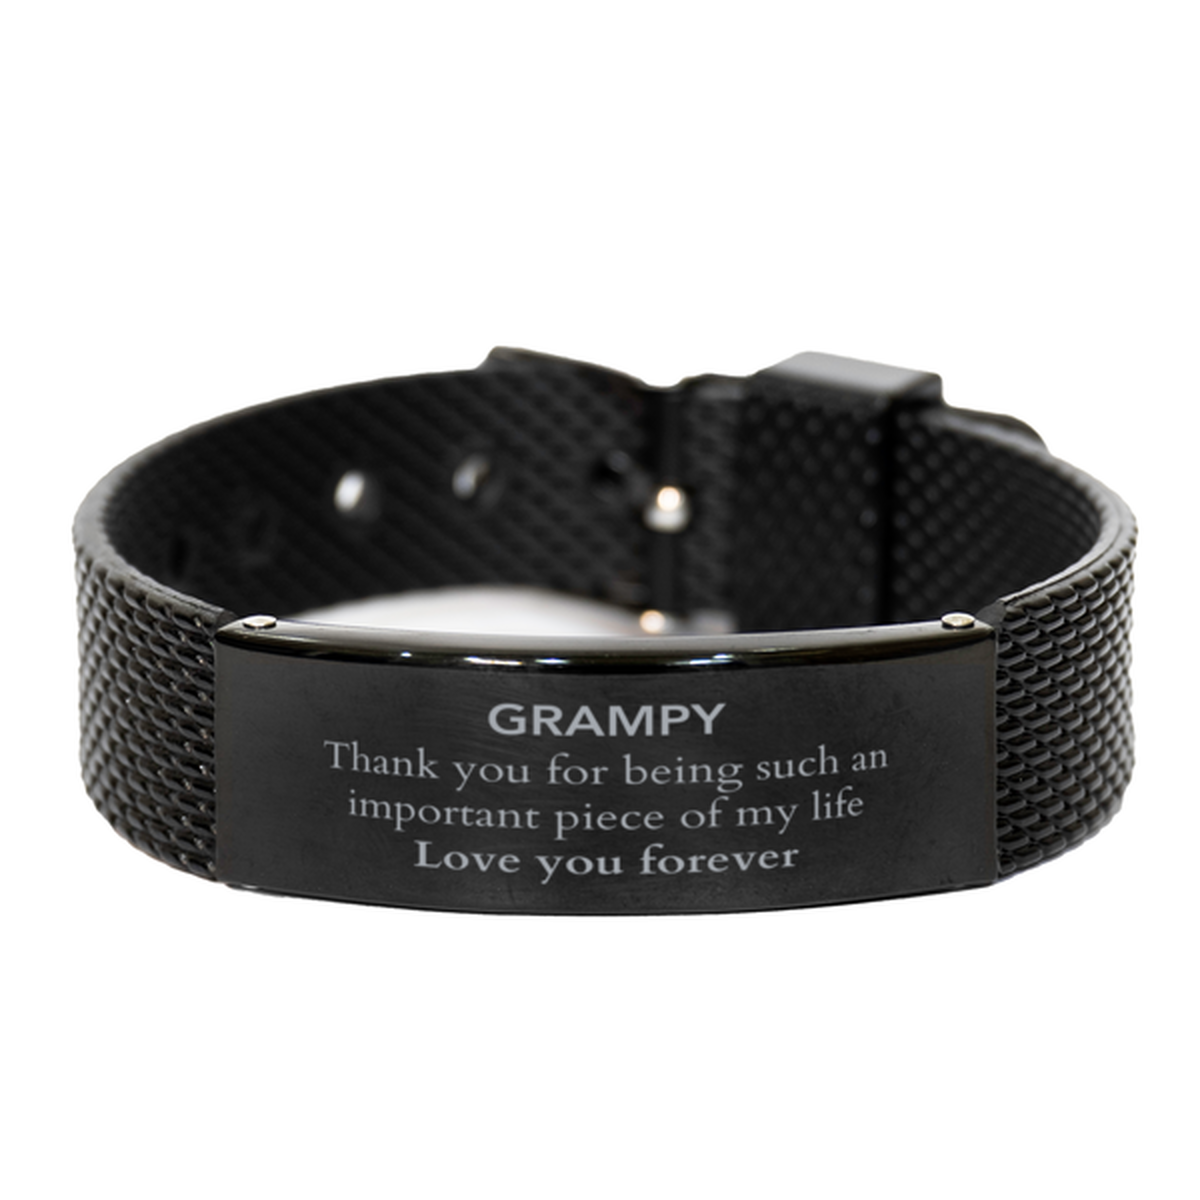 Appropriate Grampy Black Shark Mesh Bracelet Epic Birthday Gifts for Grampy Thank you for being such an important piece of my life Grampy Christmas Mothers Fathers Day